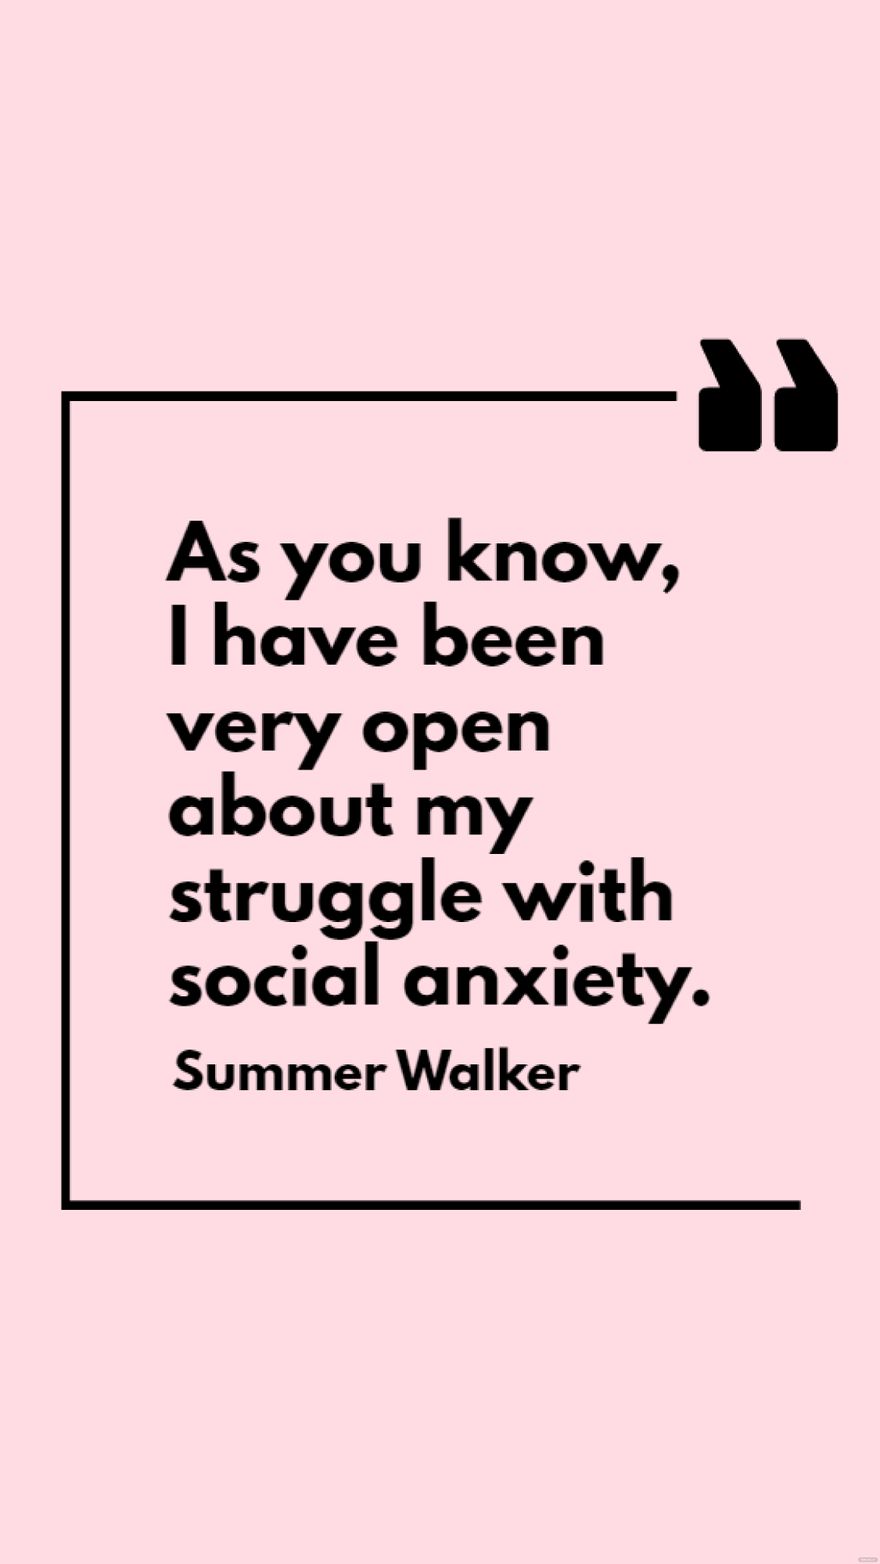 Free Summer Walker - As you know, I have been very open about my struggle with social anxiety. in JPG